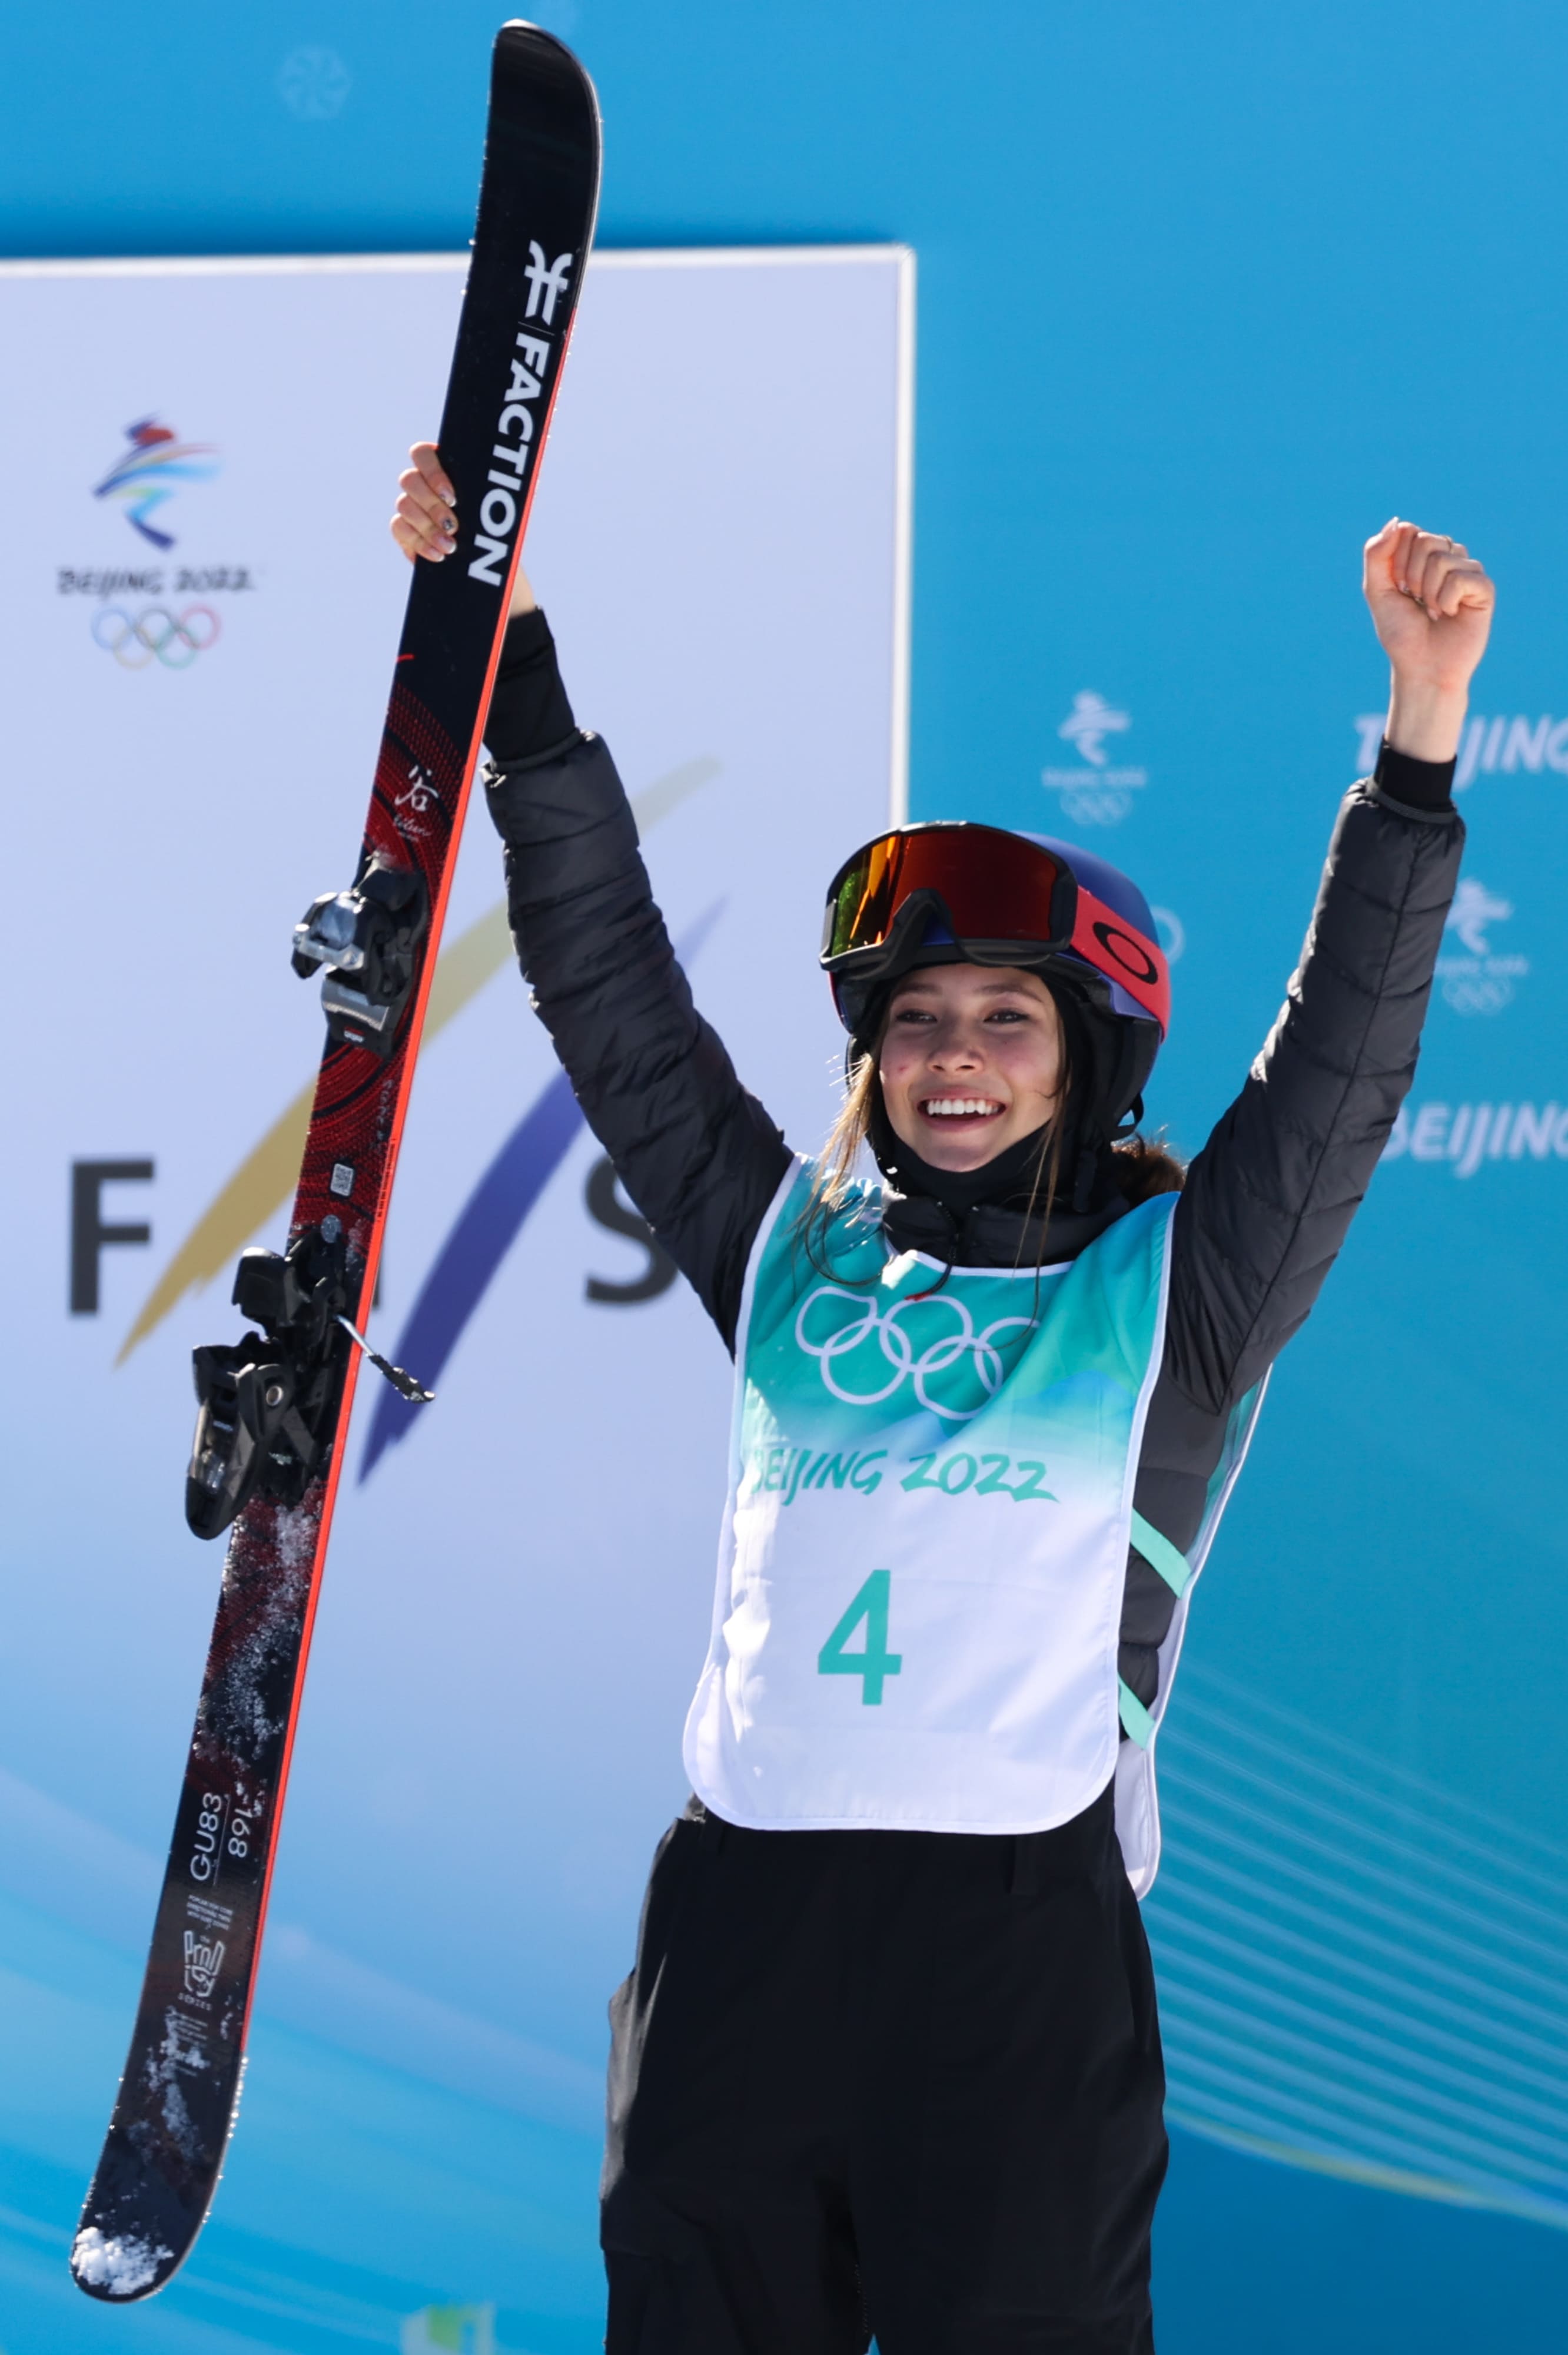 Eileen Gu, The US-Born Freestyle Skier Who Competed For China, Has Made History After Her Third Medal